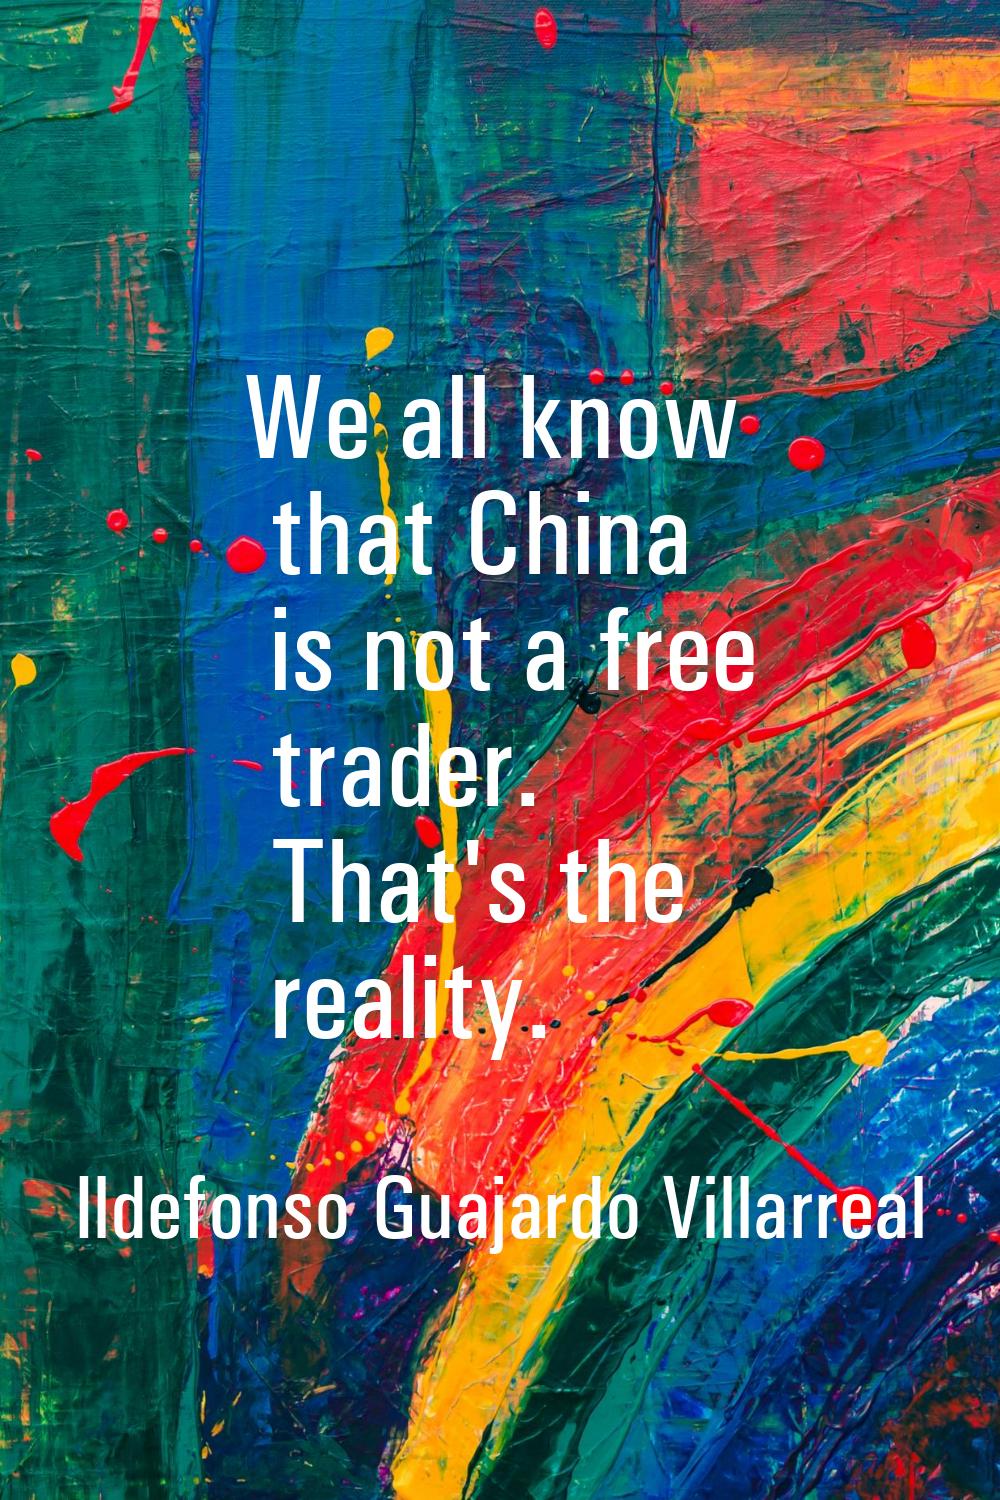 We all know that China is not a free trader. That's the reality.